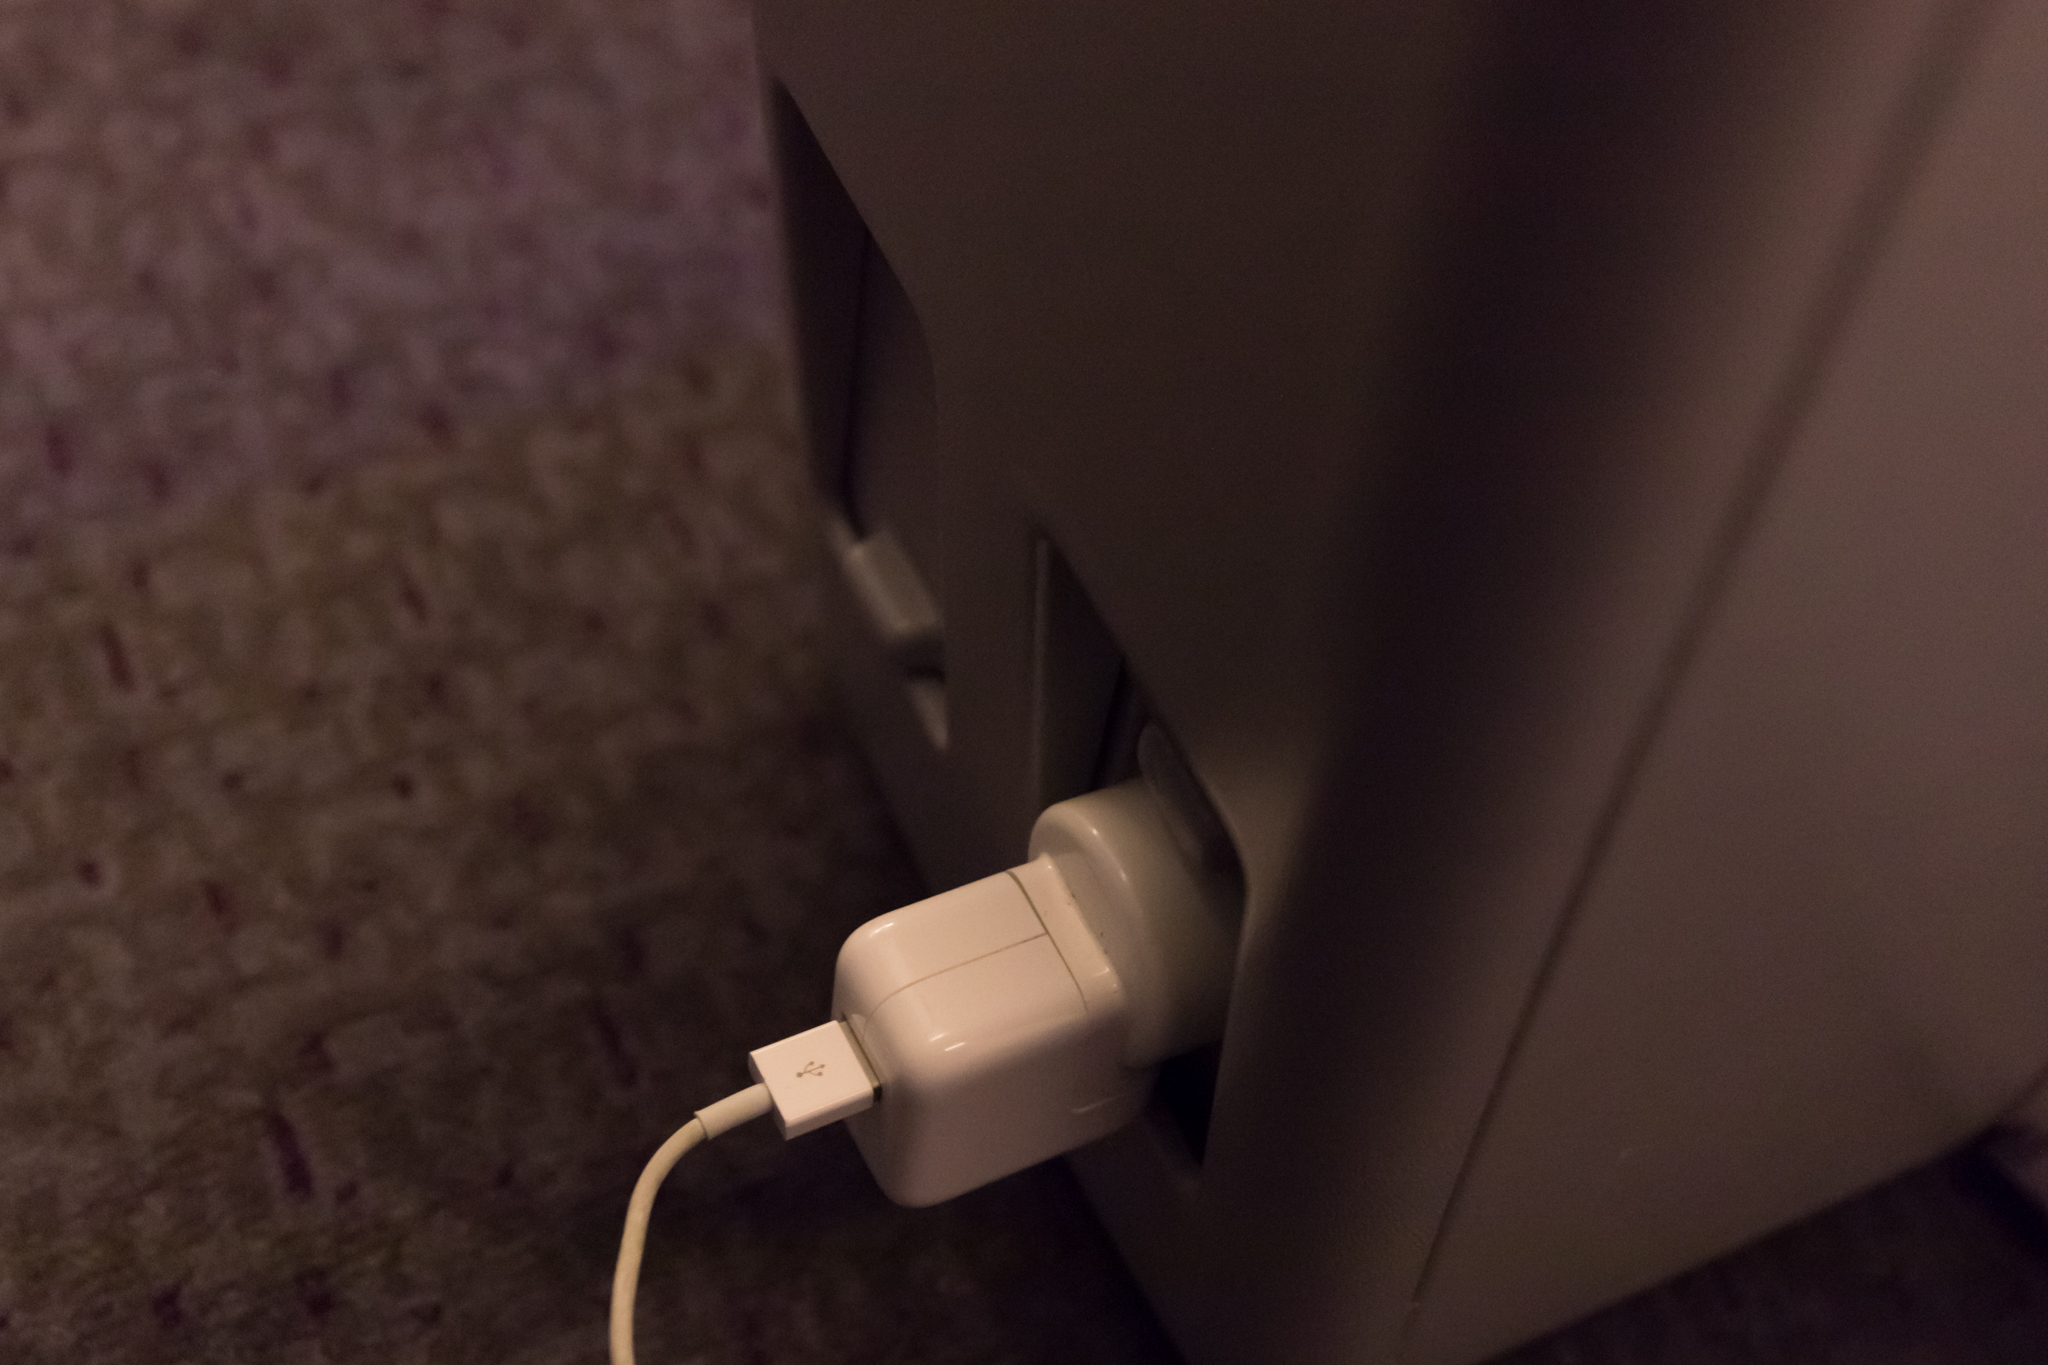 a white usb cable plugged into a rectangular object